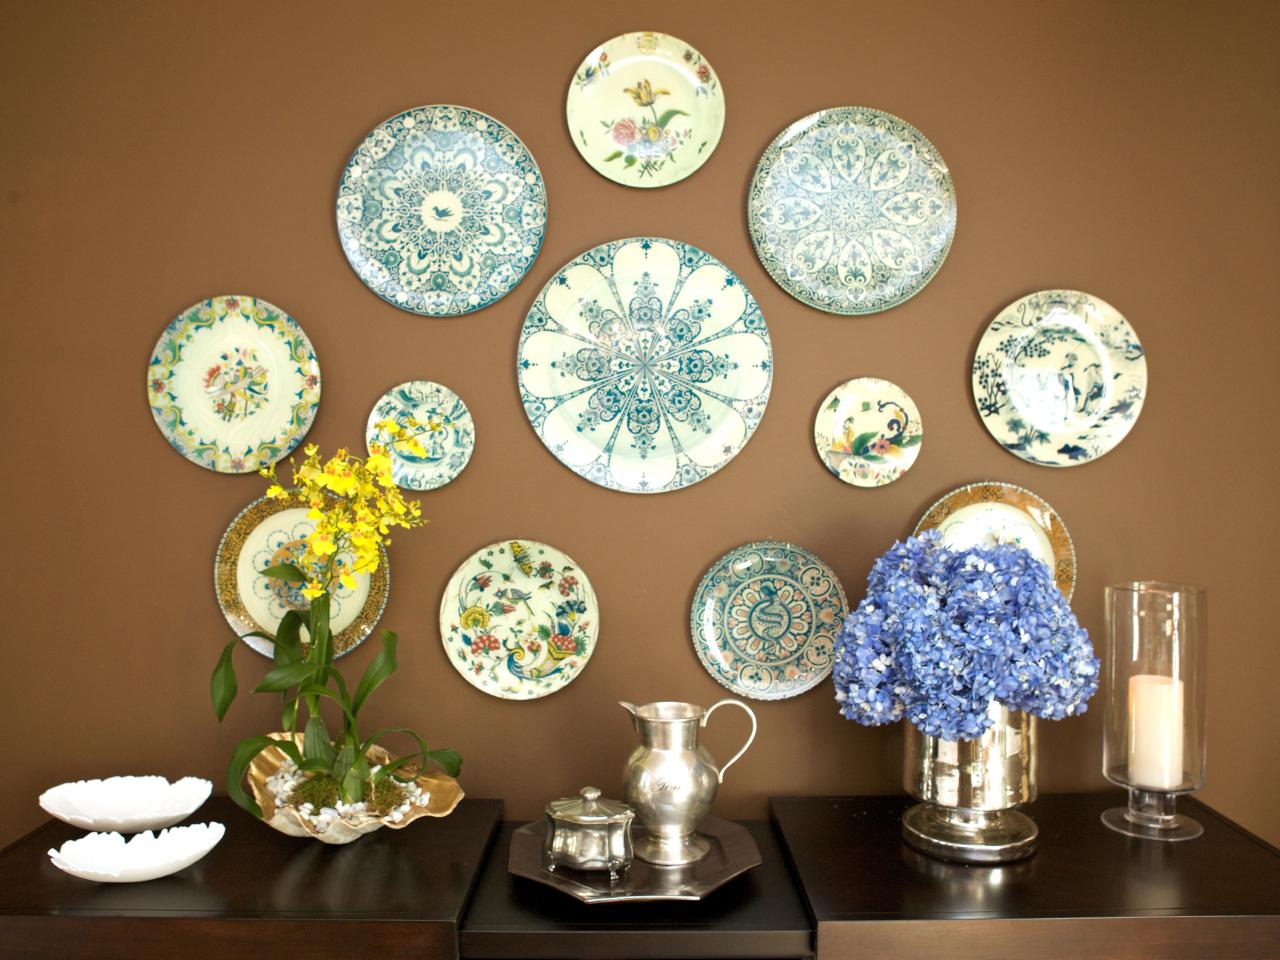 15 Ways To Dress Up Your Dining Room Walls HGTVs Decorating